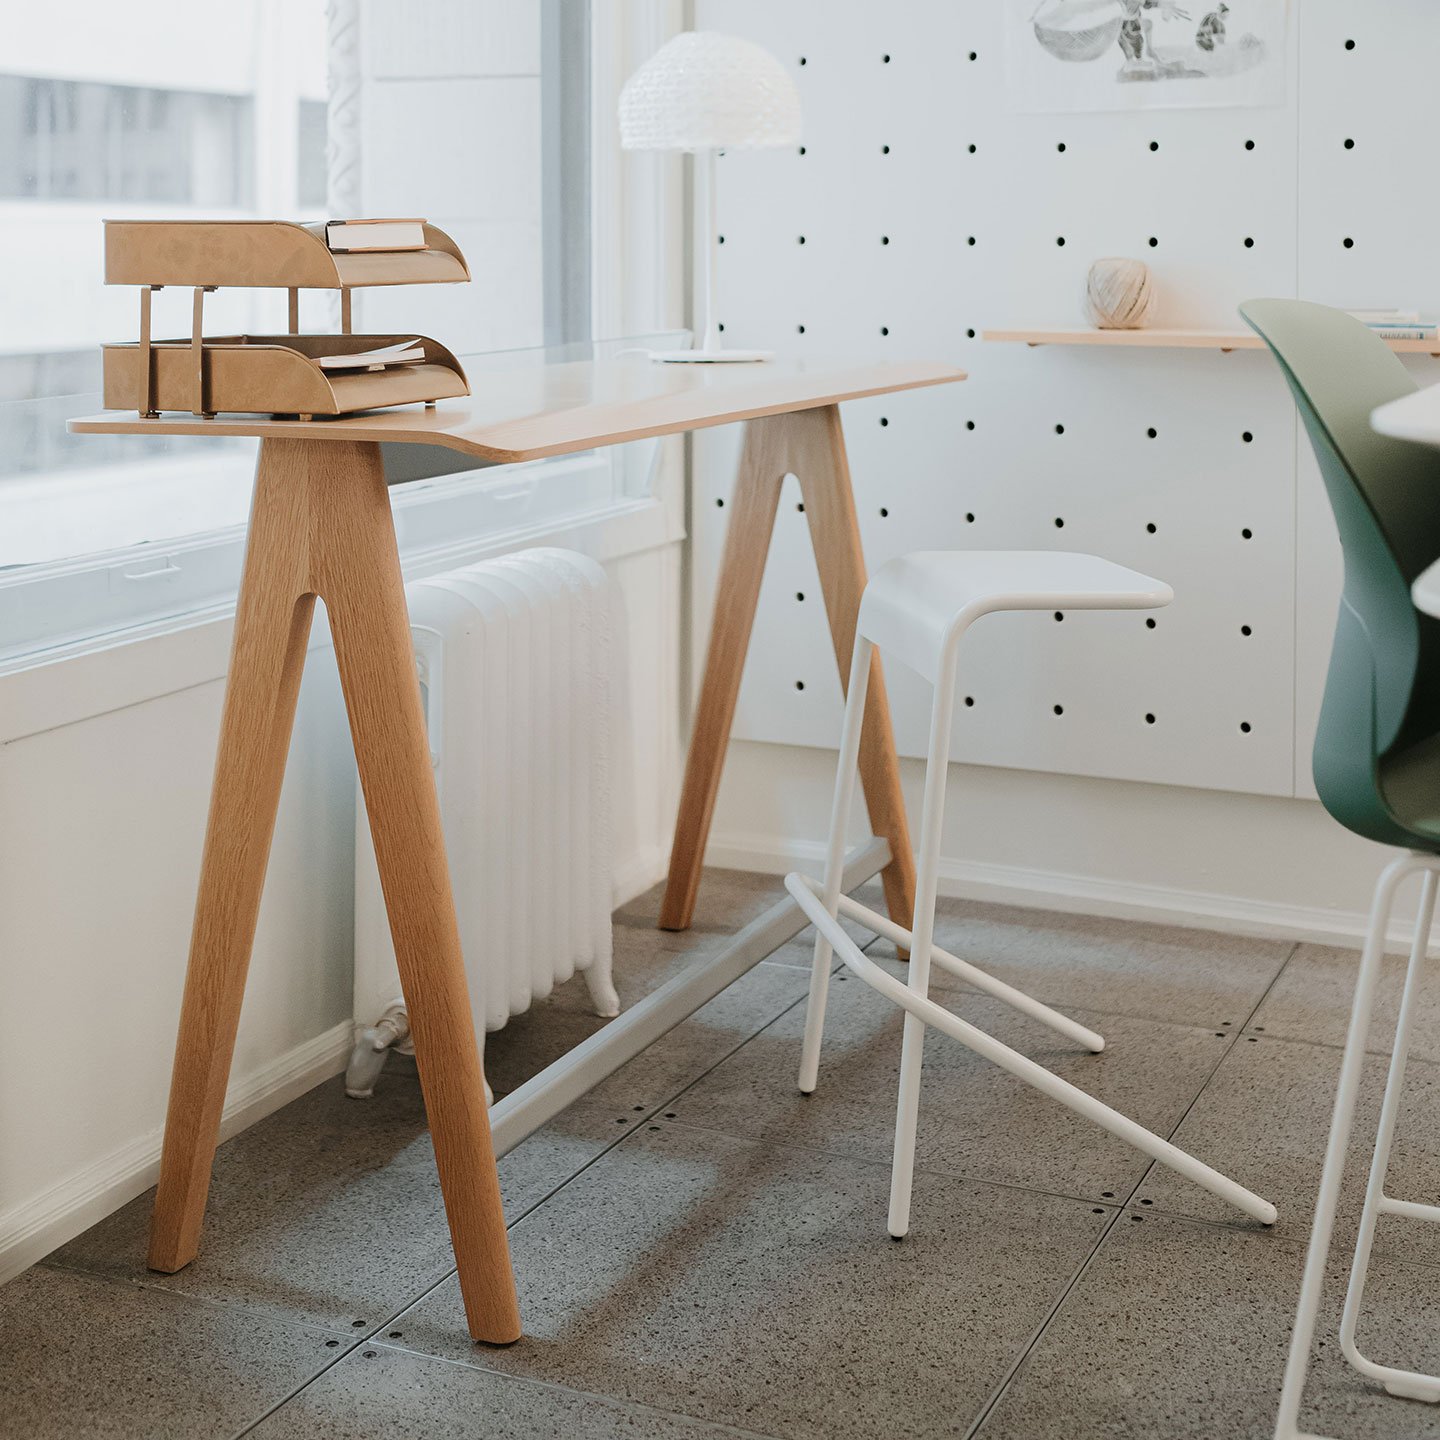 Haworth Alodia white stool paired with wooden laptop table in a refresh space